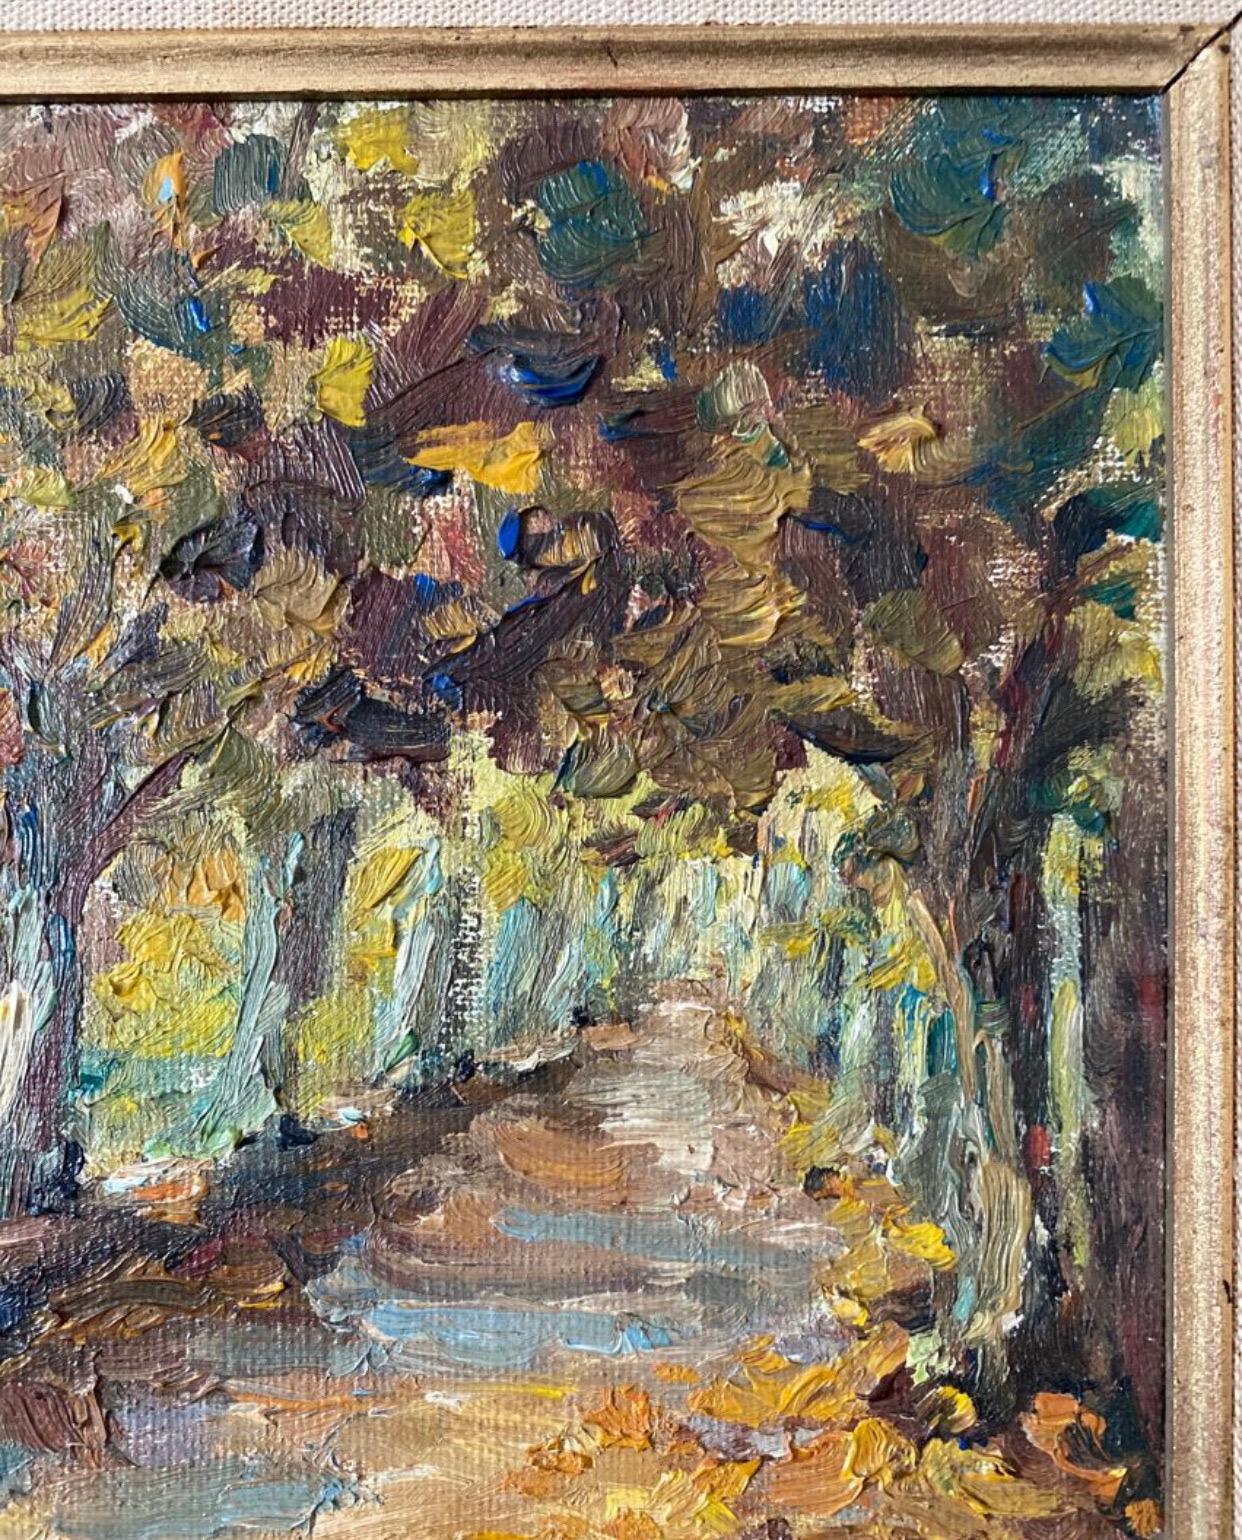 Hand-Painted 1950s French impressionist Painting For Sale